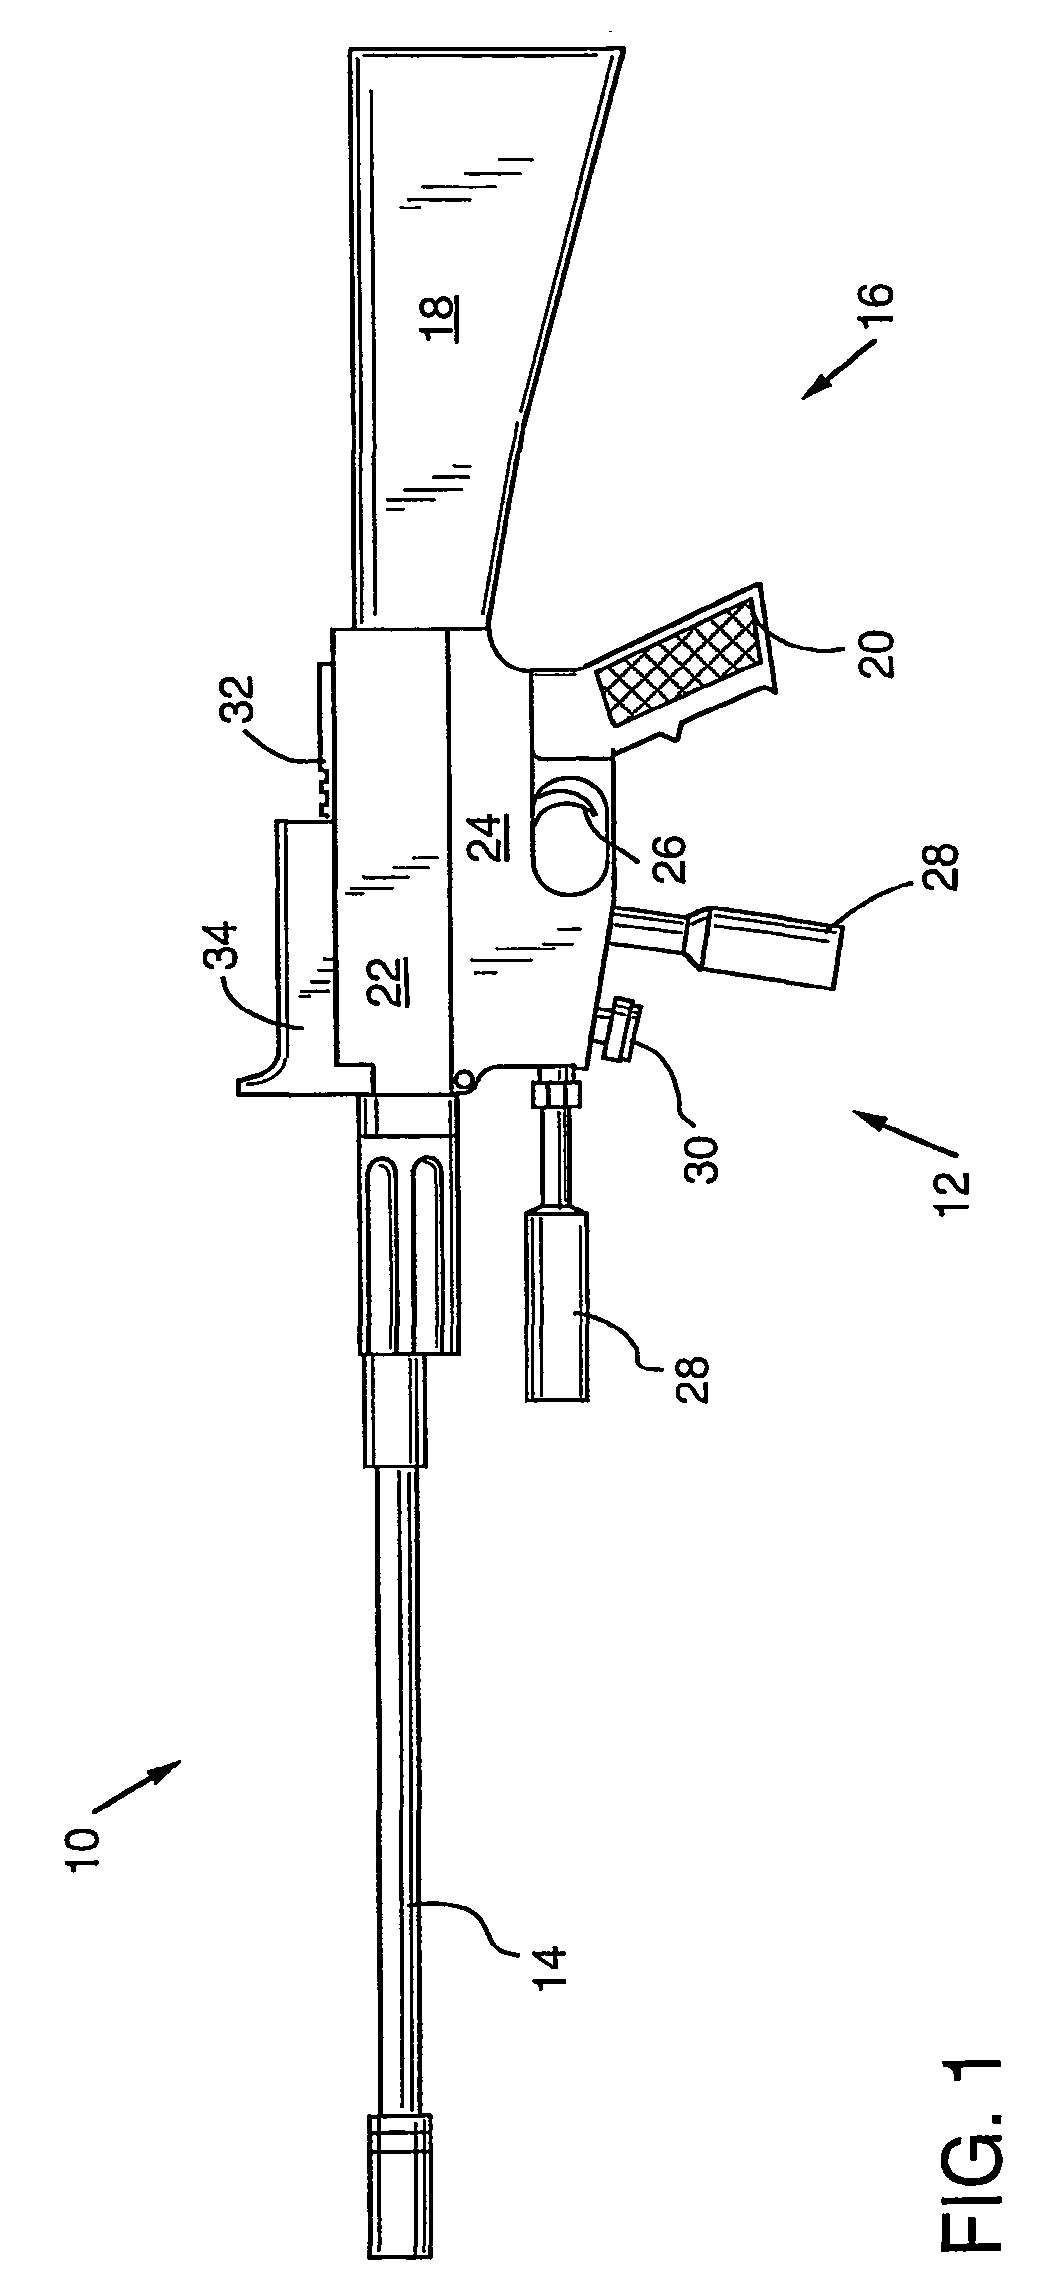 Compressed gas-powdered gun simulating the recoil of a conventional firearm